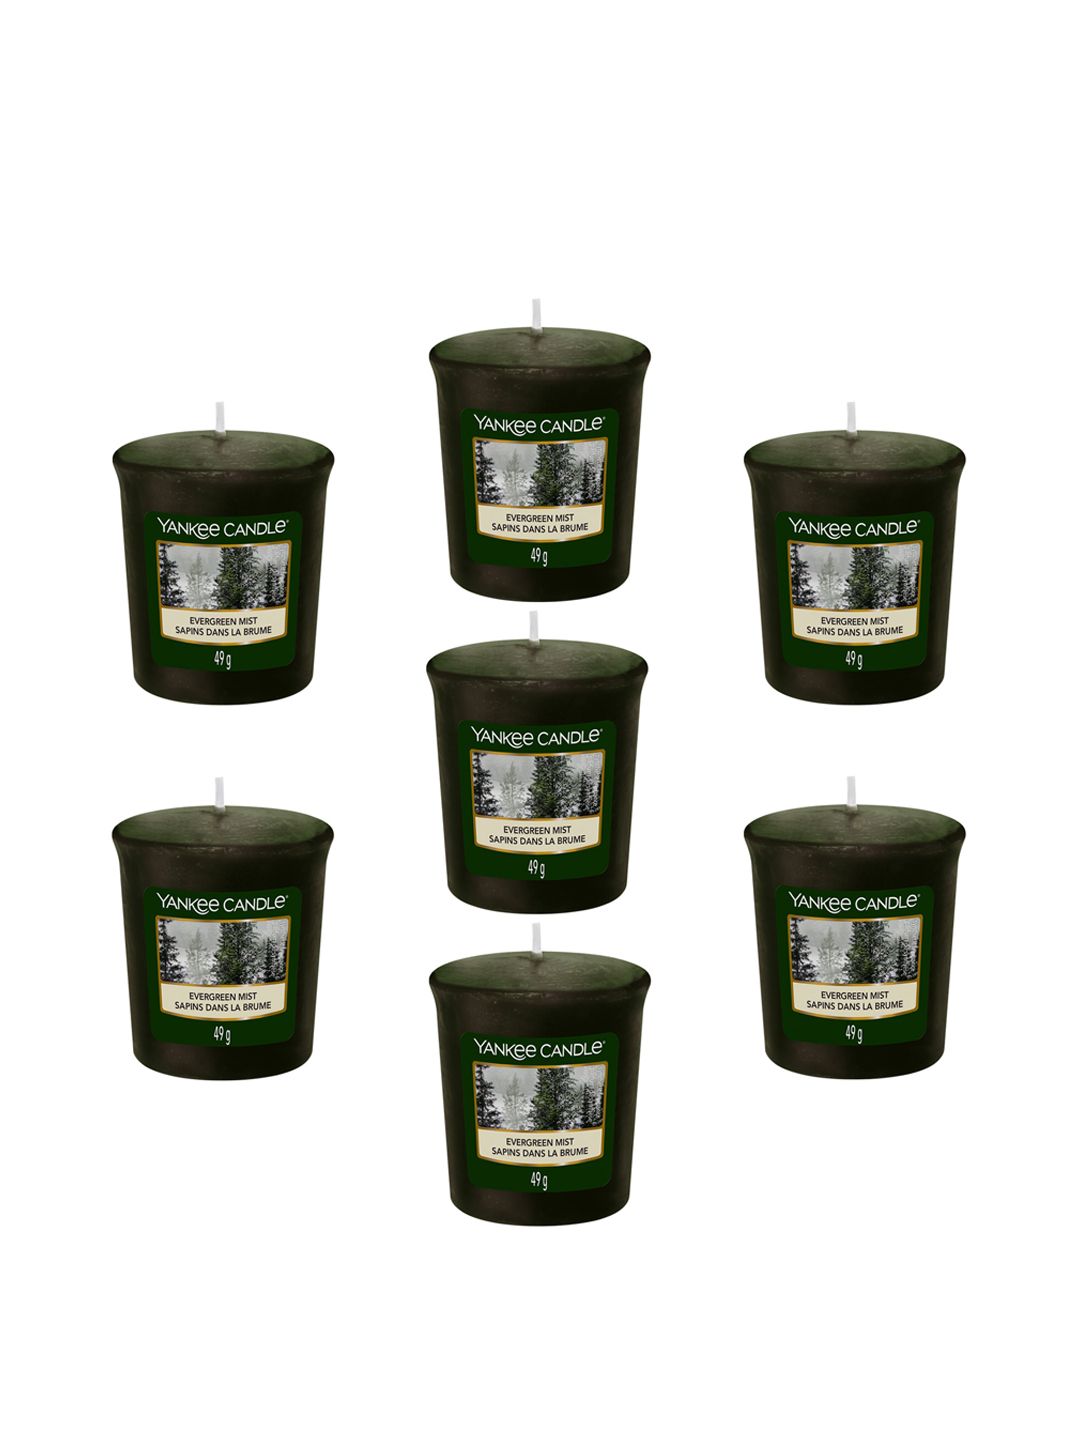 YANKEE CANDLE Set Of 7 Green Solid Classic Votive Evergreen Mist Scented Candles Price in India